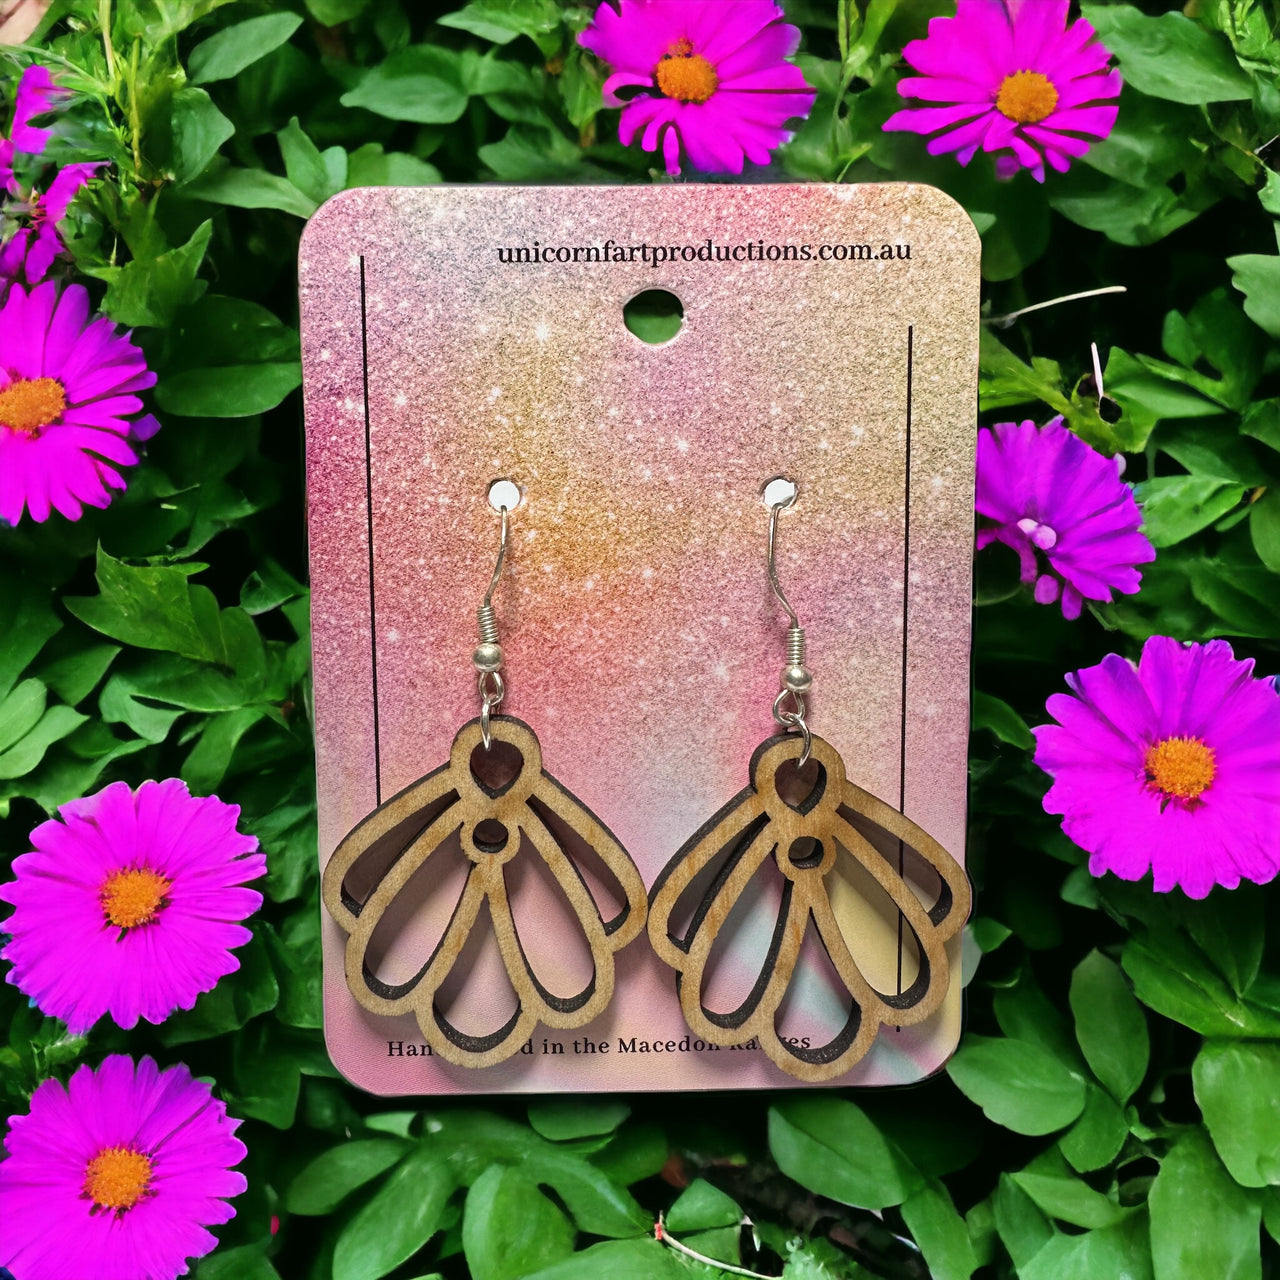 Wooden Handmade earrings crafted from sustainable timber - Nature 011